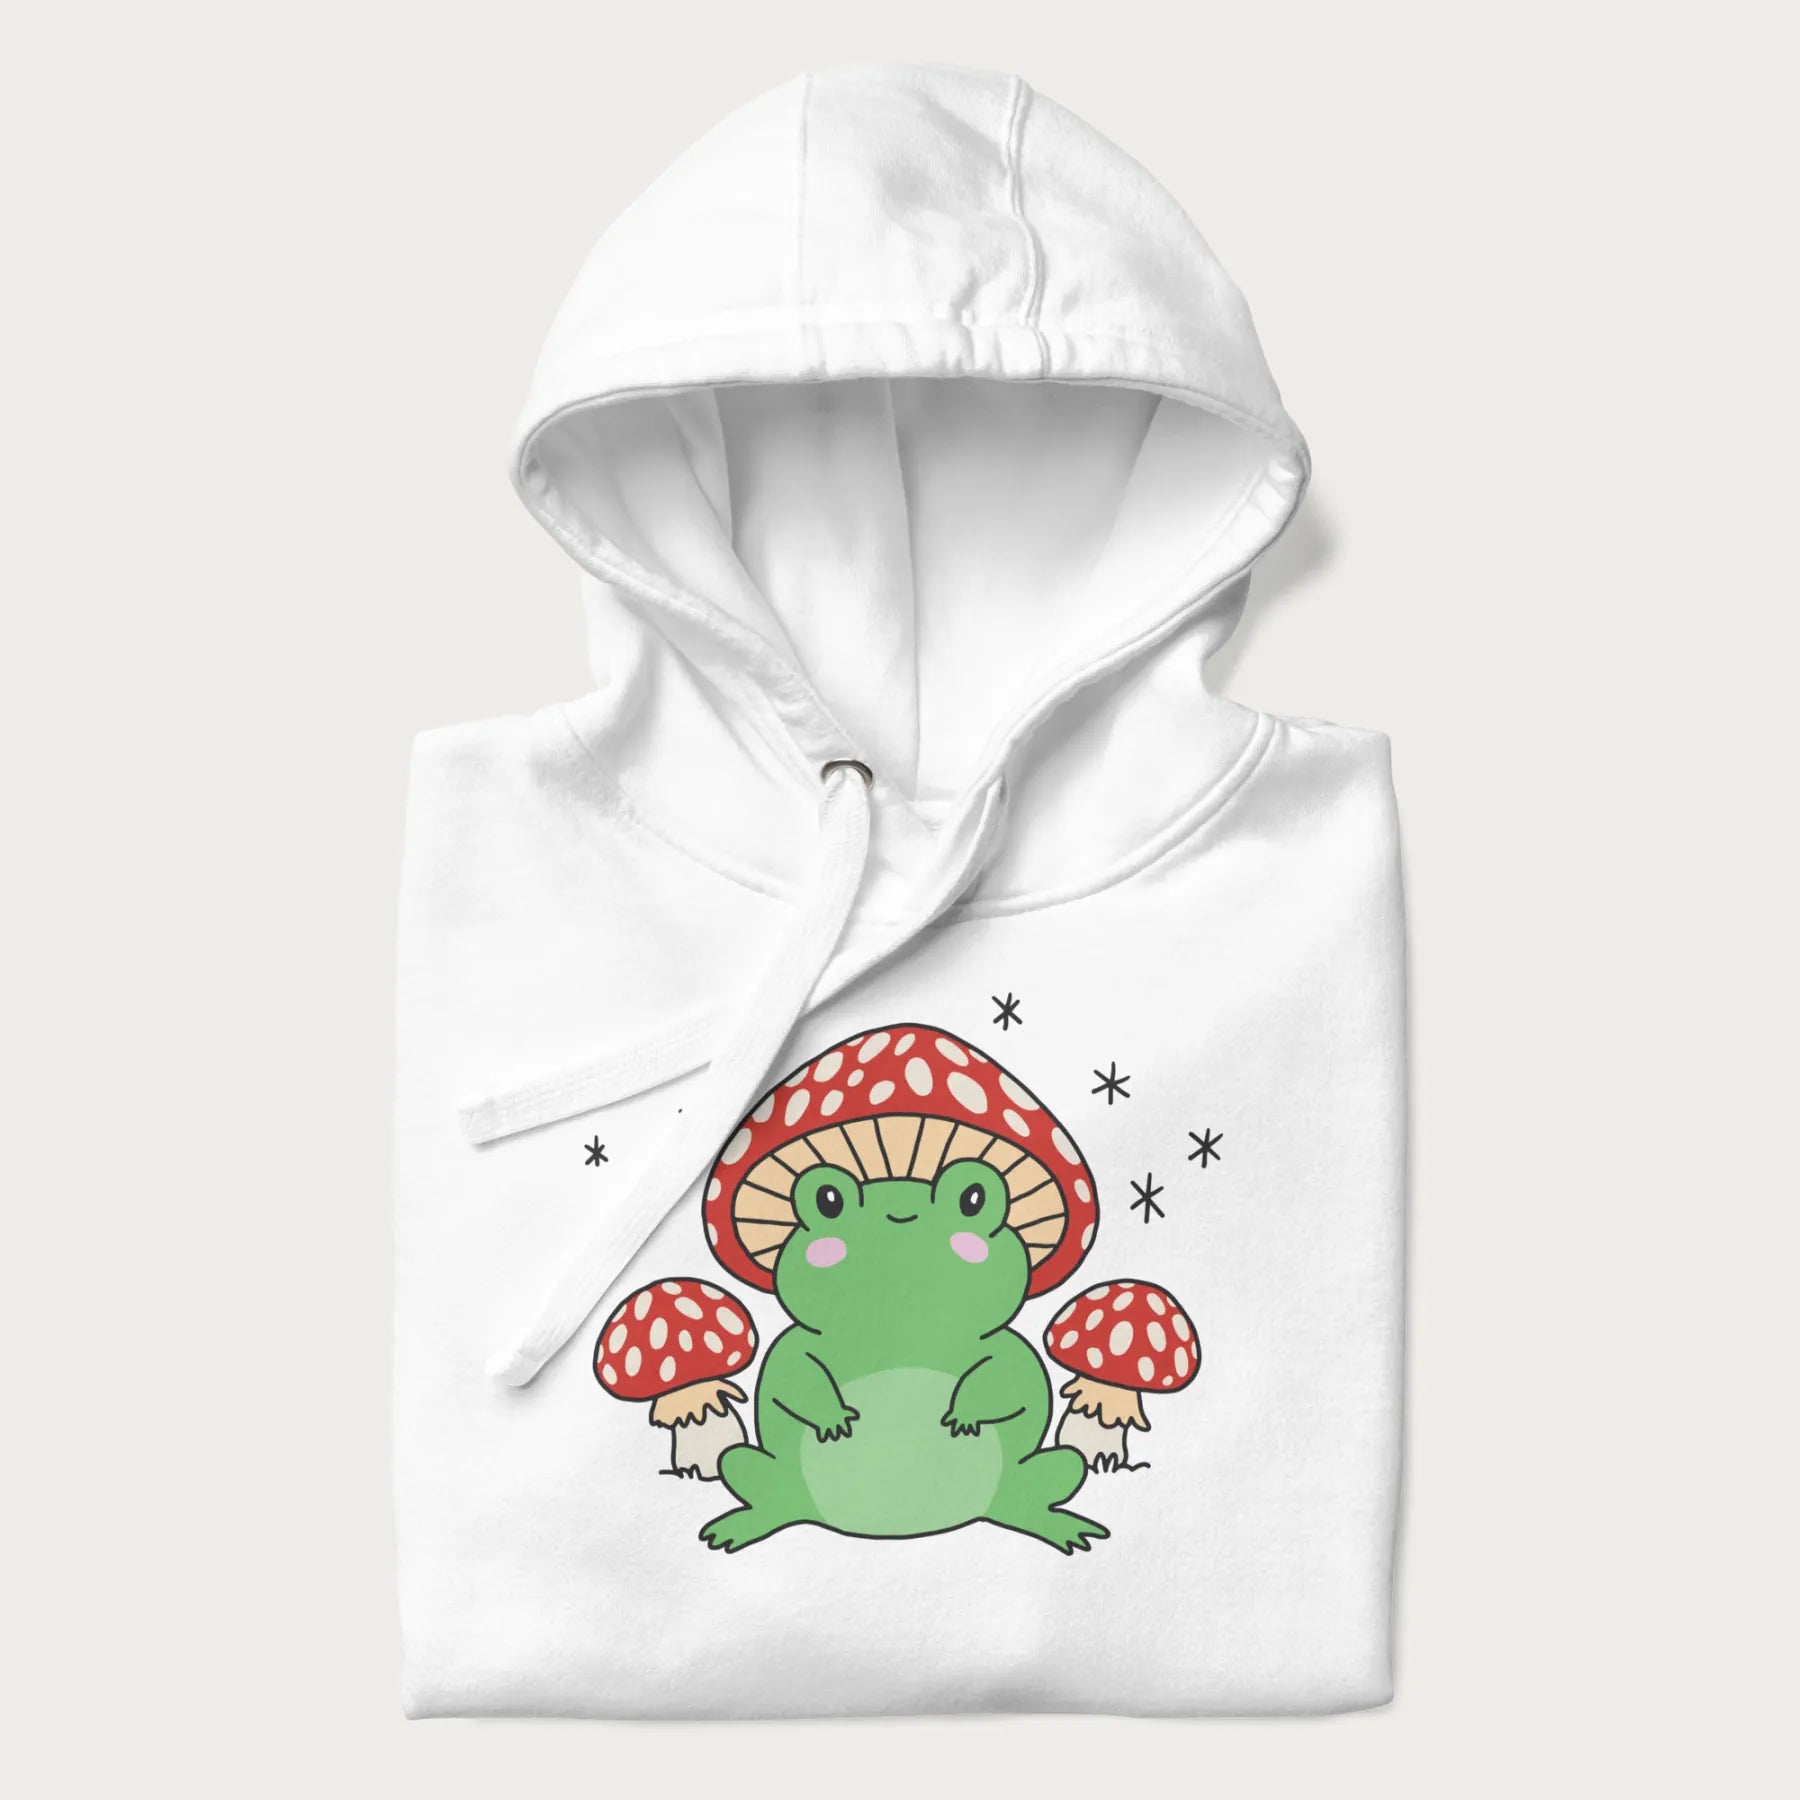 Folded white hoodie will illustration of a cute green frog with red and white mushrooms.